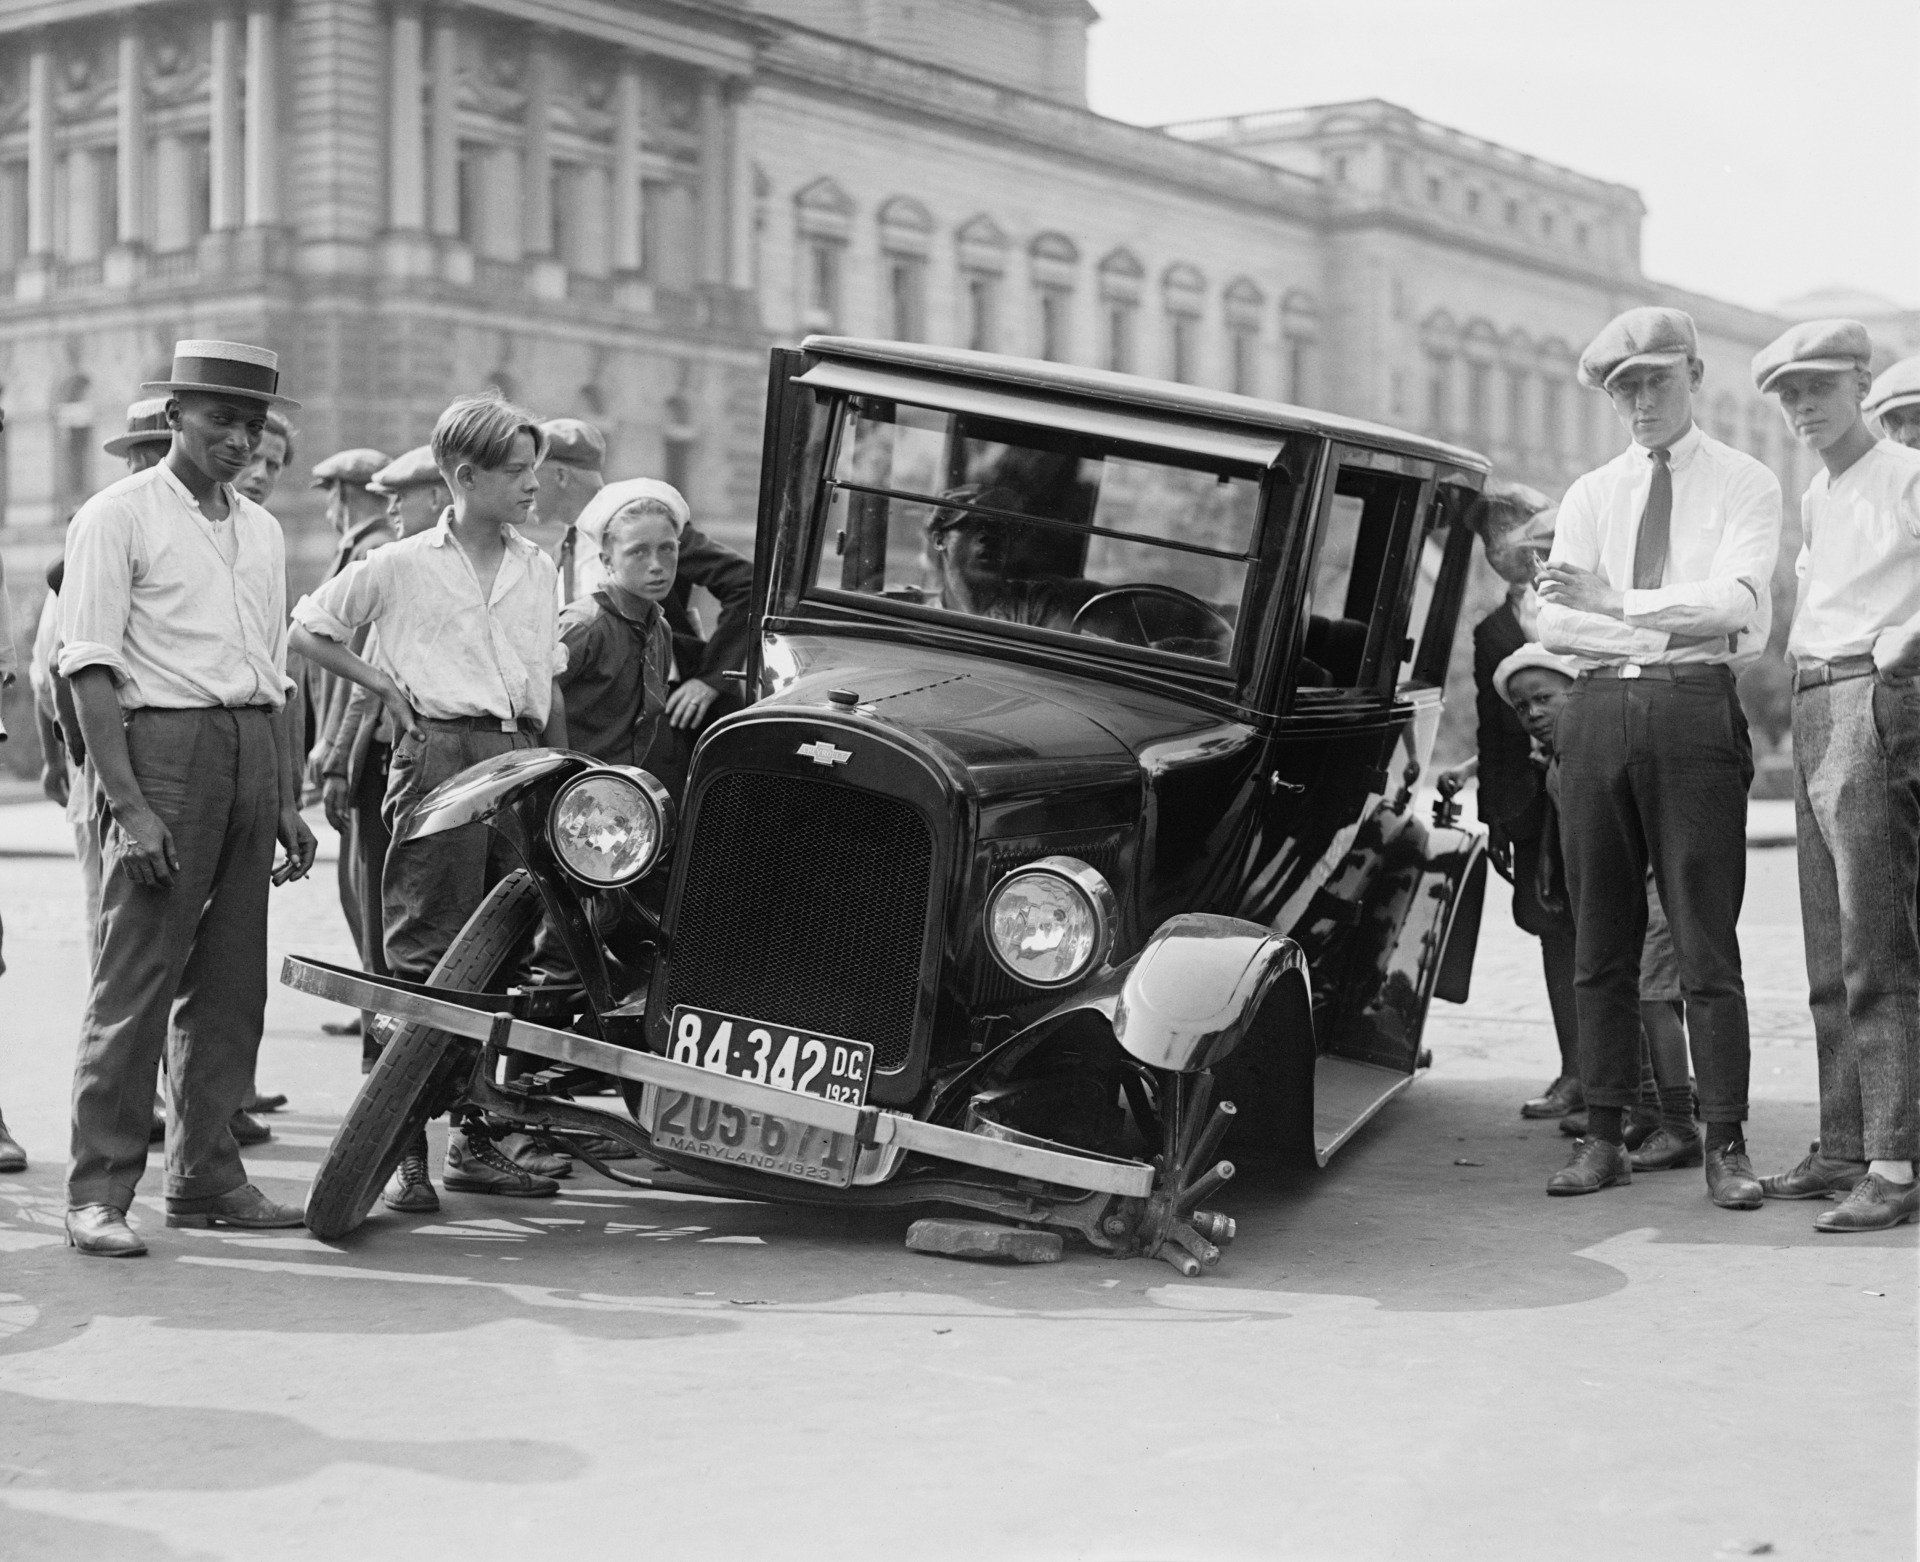 Old time picture showing an old car with its front wheel missing and several boys standing on either side of the vehicle.